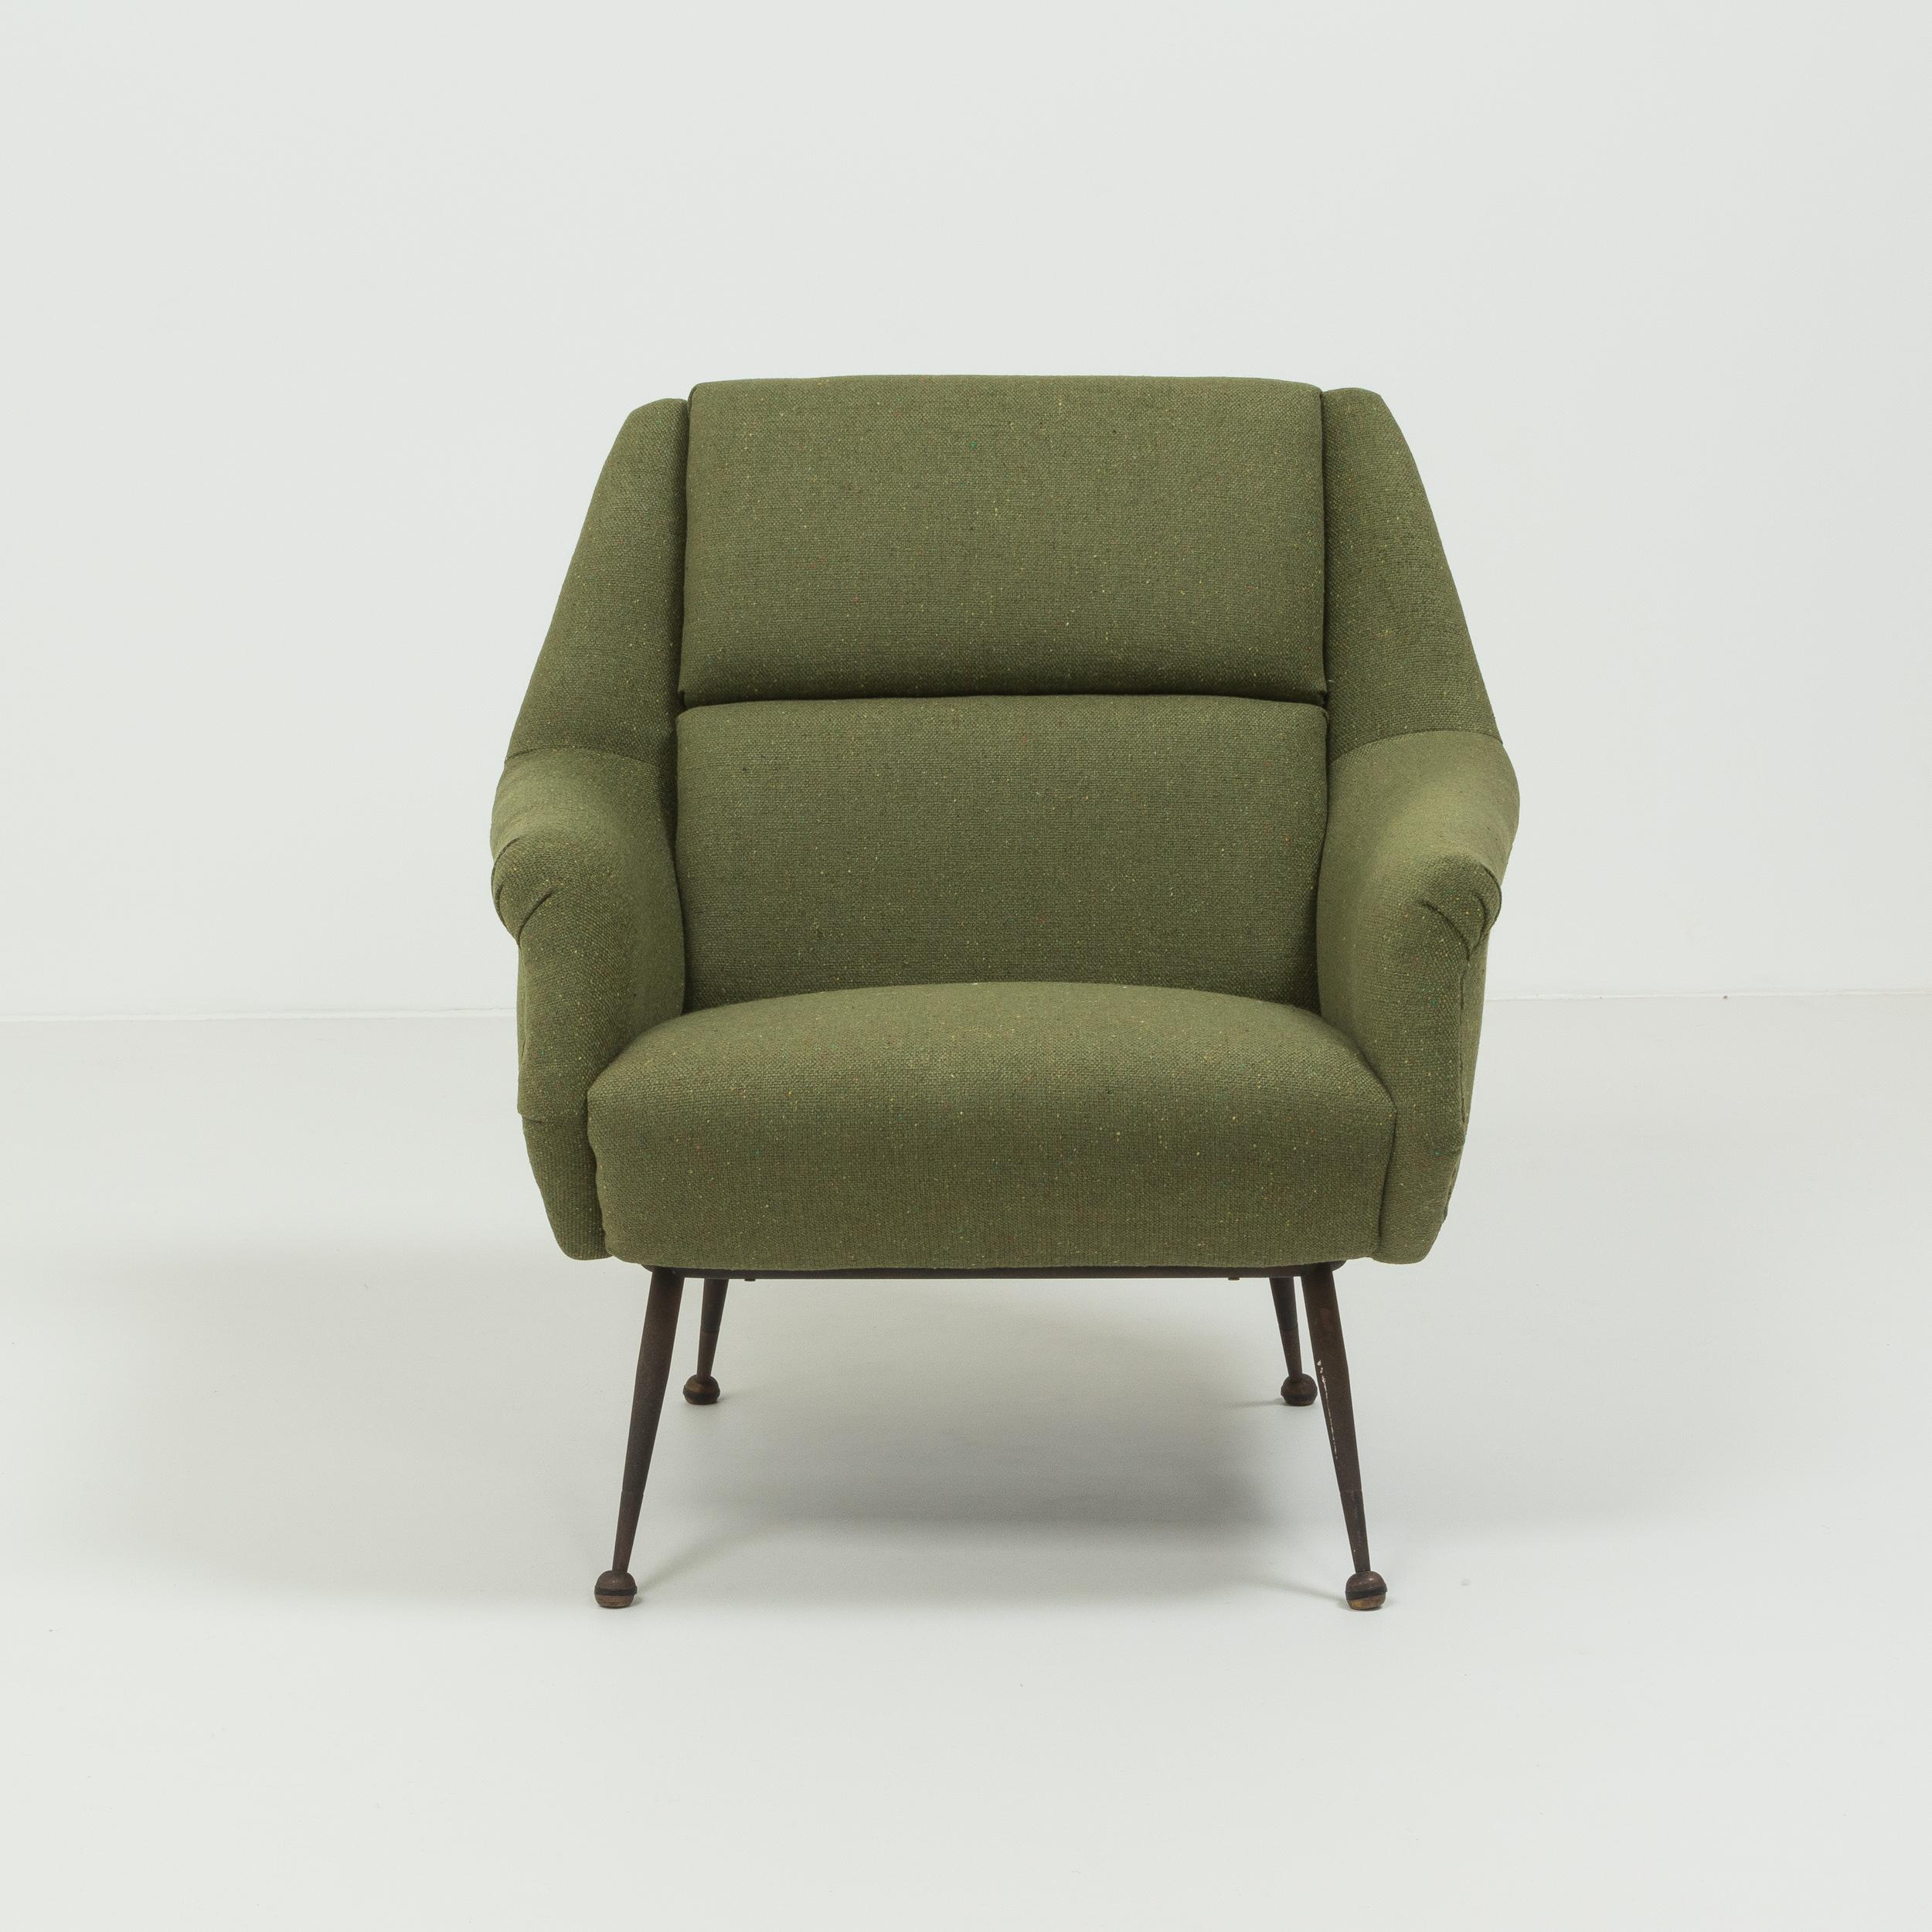 Designed by Gio Ponti for Minotti, this Classic lounge chair is a fantastic example of Mid-Century Modern design.

The chair has been newly and completely reupholstered in olive green tweed wool with multicolored flecks.

Featuring metal